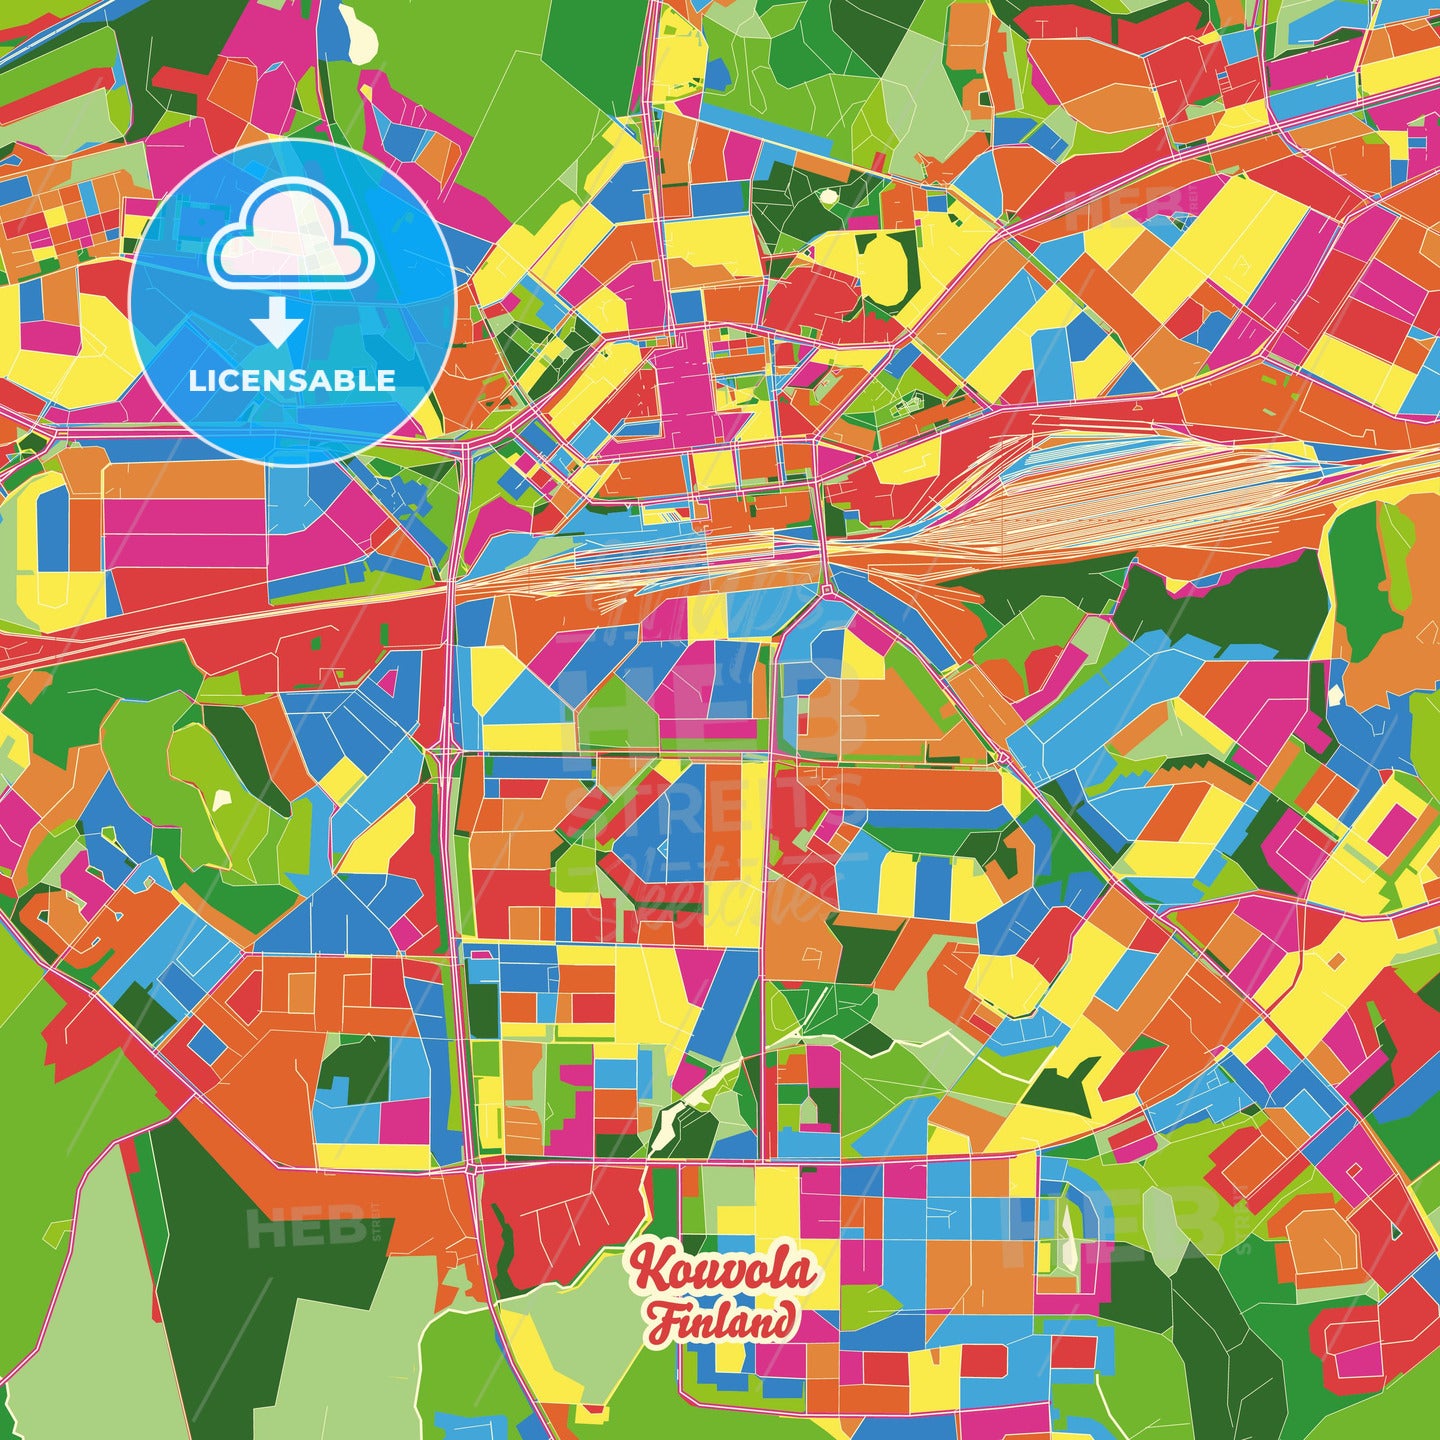 Kouvola, Finland Crazy Colorful Street Map Poster Template - HEBSTREITS Sketches